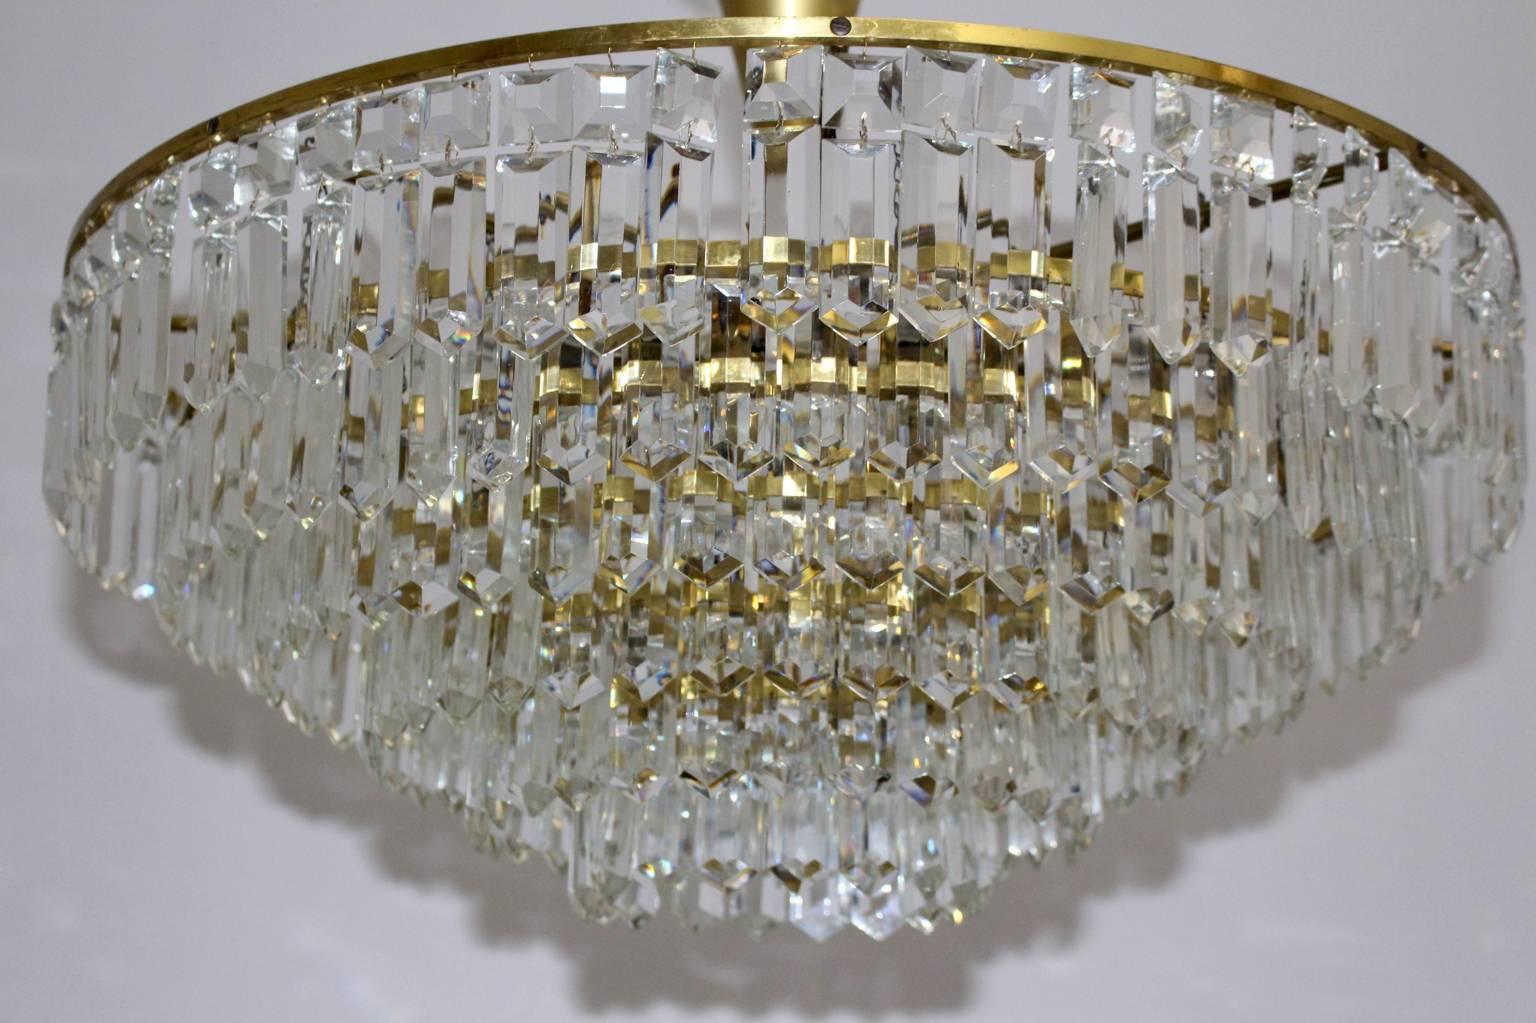 Mid century modern vintage chandelier, which shows hand-cut crystal glasses in squared and rectangular form.
While the two tiered frame was made of brass the chandelier features nine sockets E 27.
The chandelier was designed and manufactured by